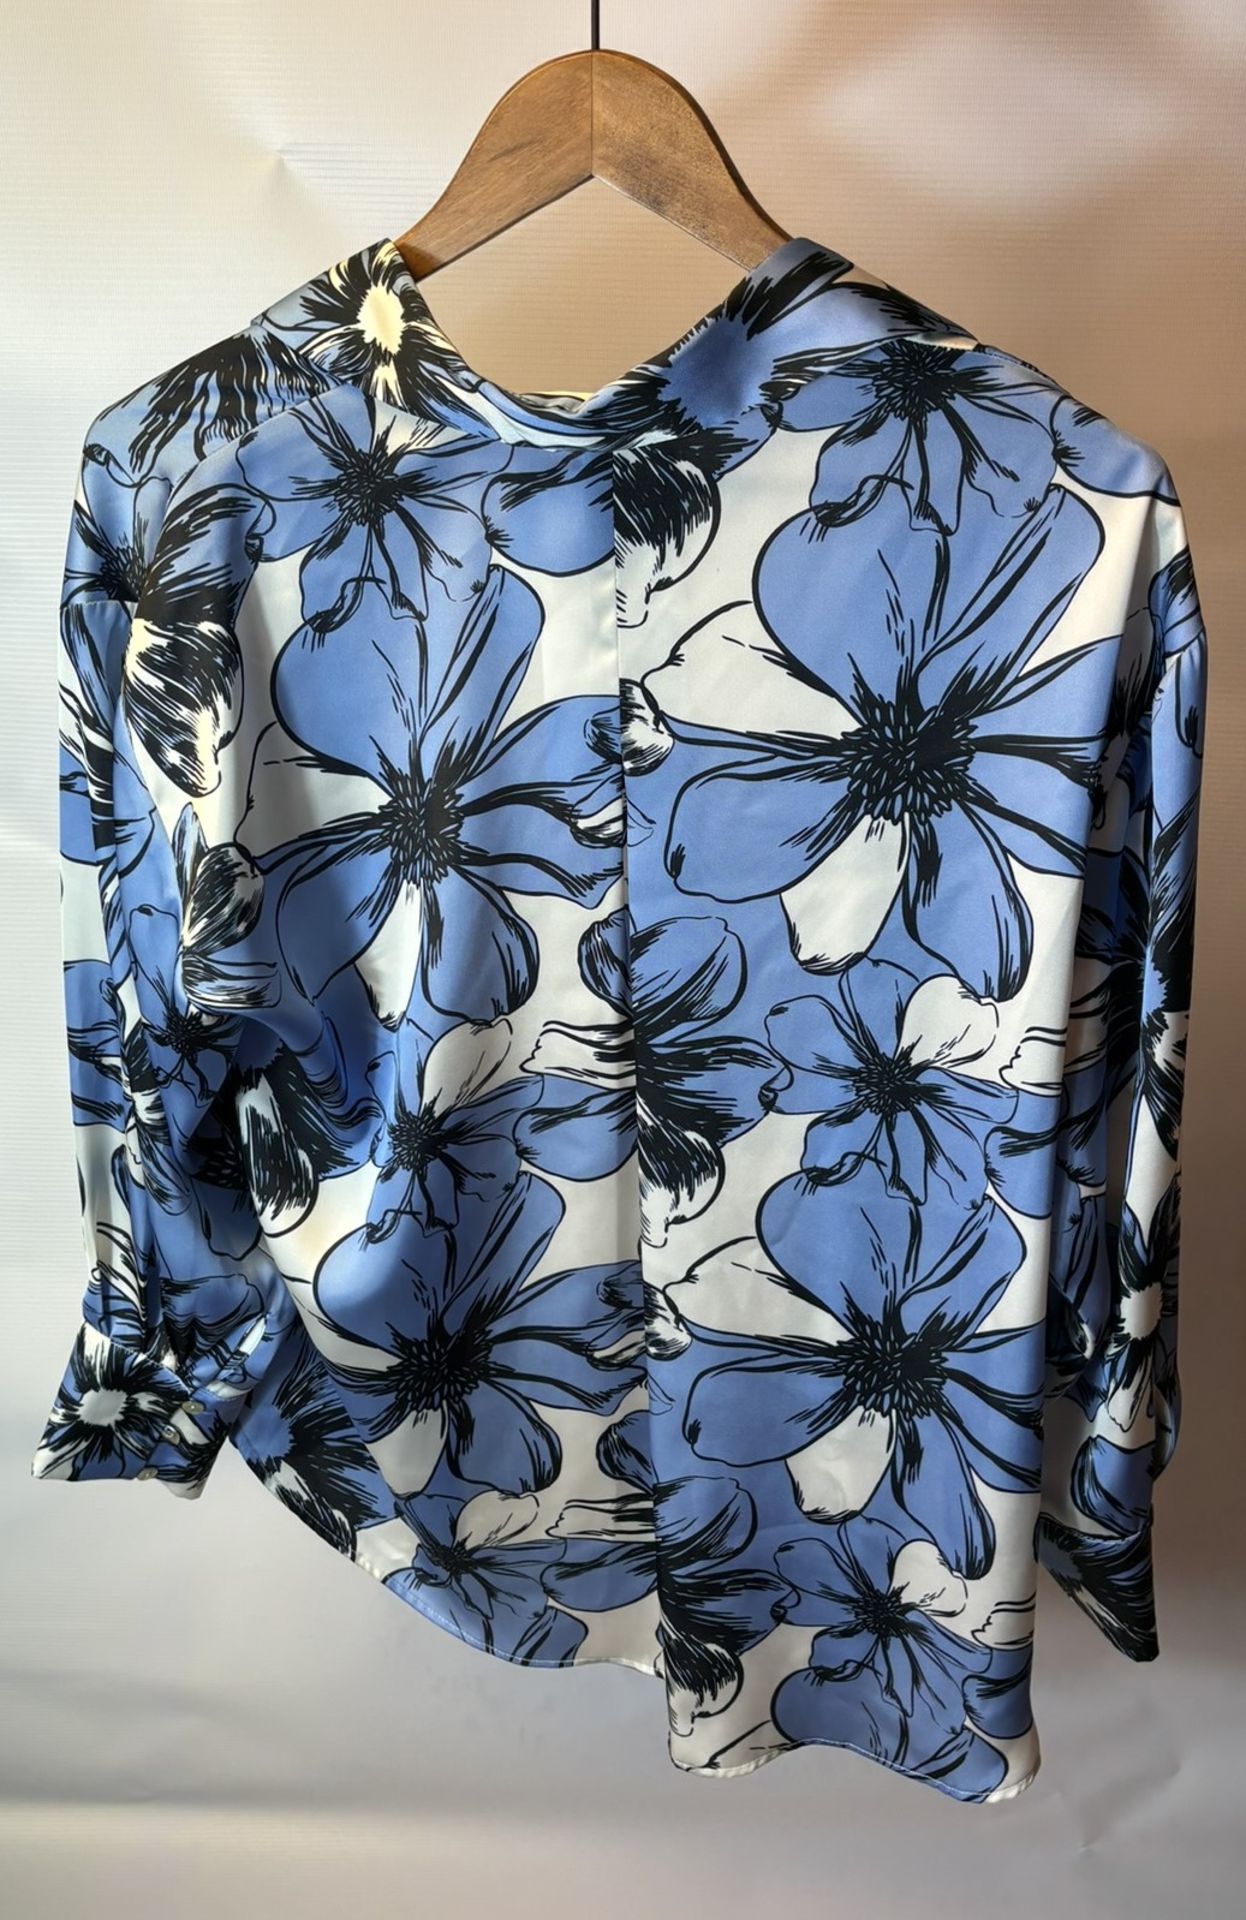 8 x Various Women's Dresses / Blouses / Blazers & Shirts As Seen In Photos - Image 23 of 24